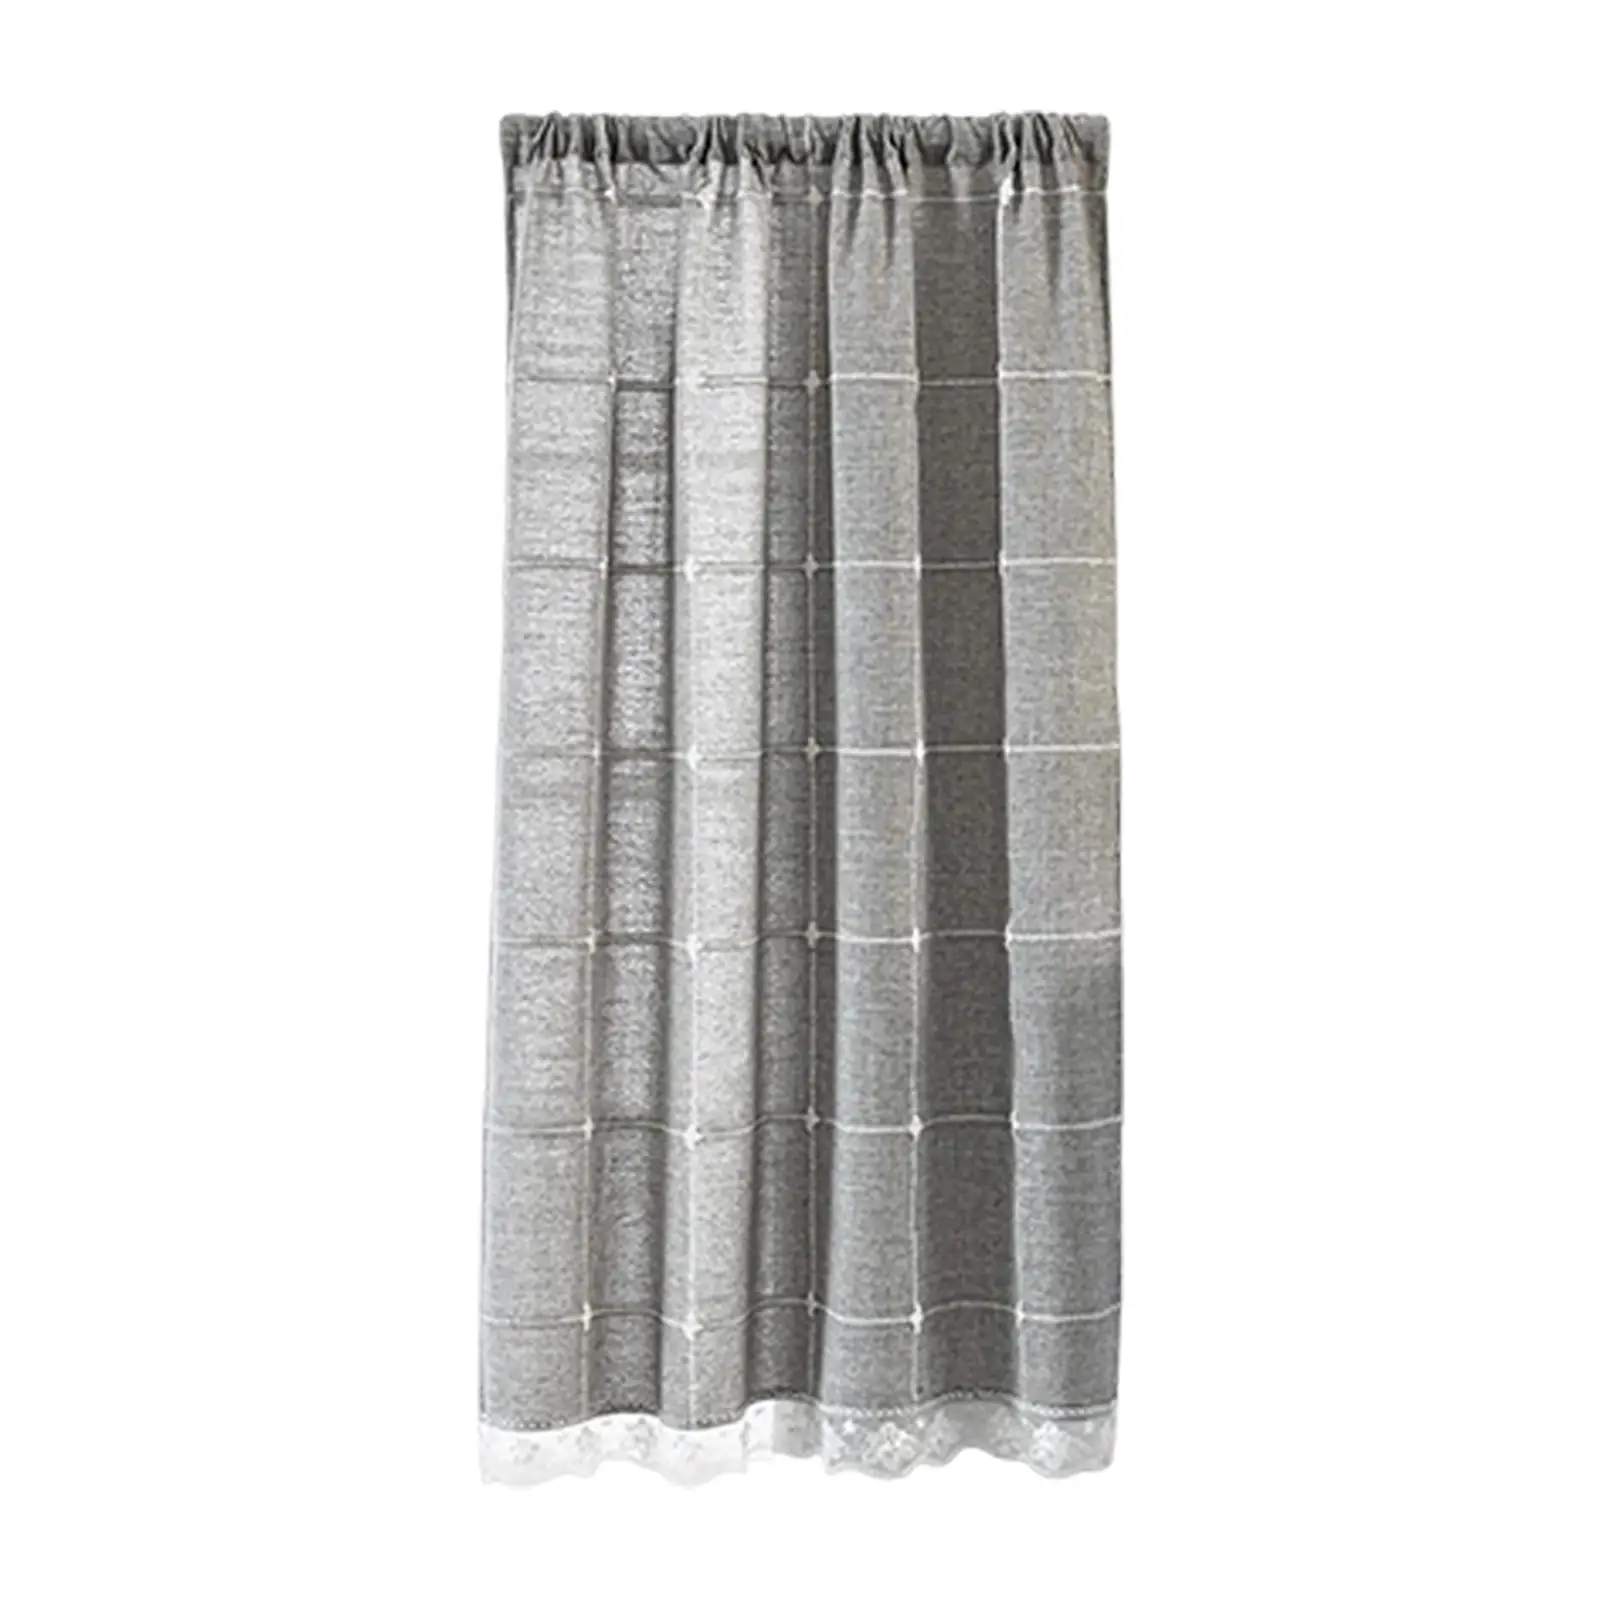 Stylish Rod Pocket Curtains 51inch Long 39inch Width Translucent Privacy Drapes